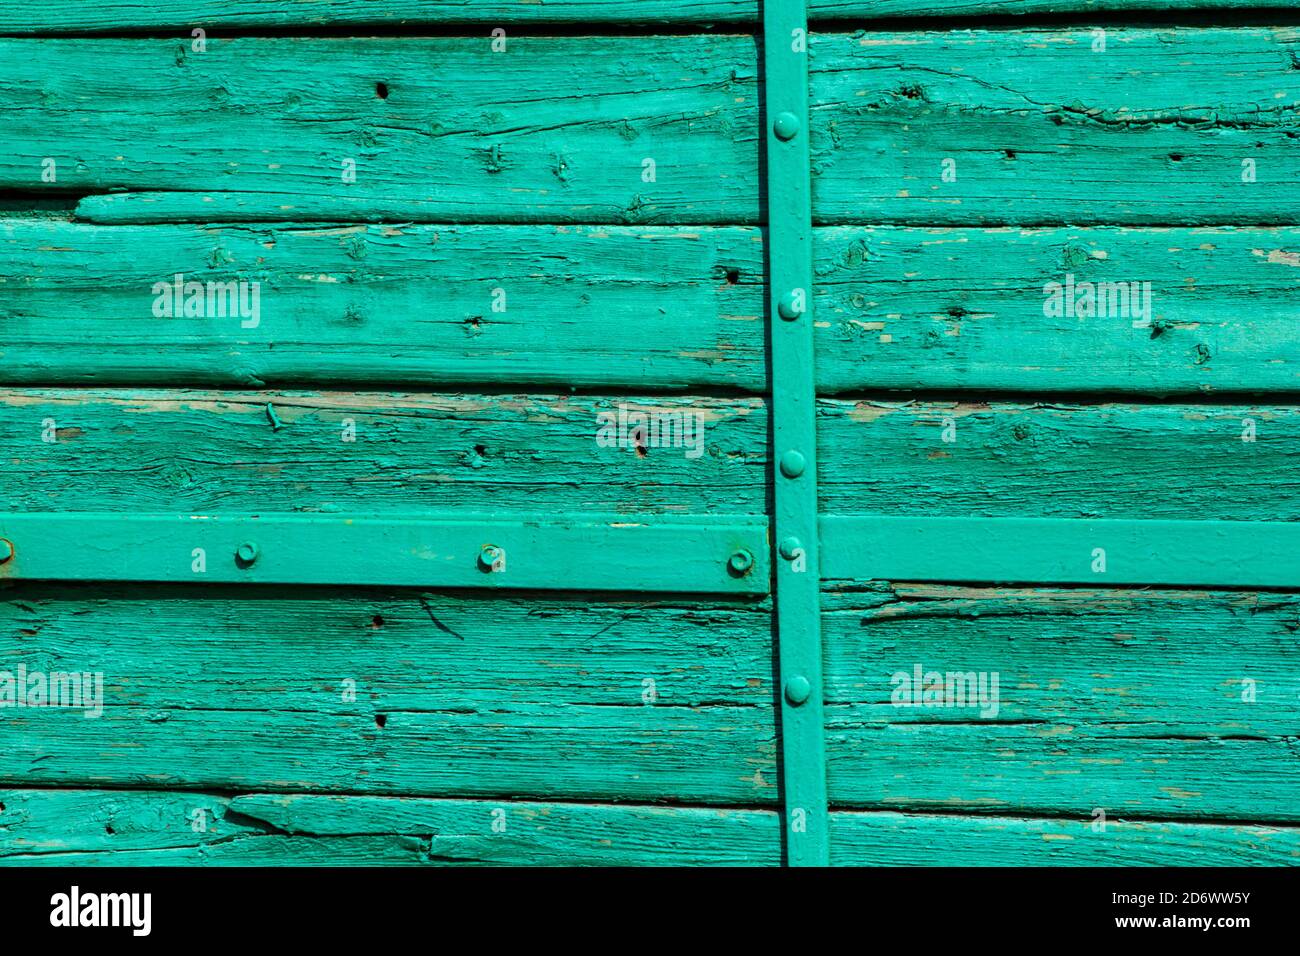 turquoise wood old plank texture background Stock Photo